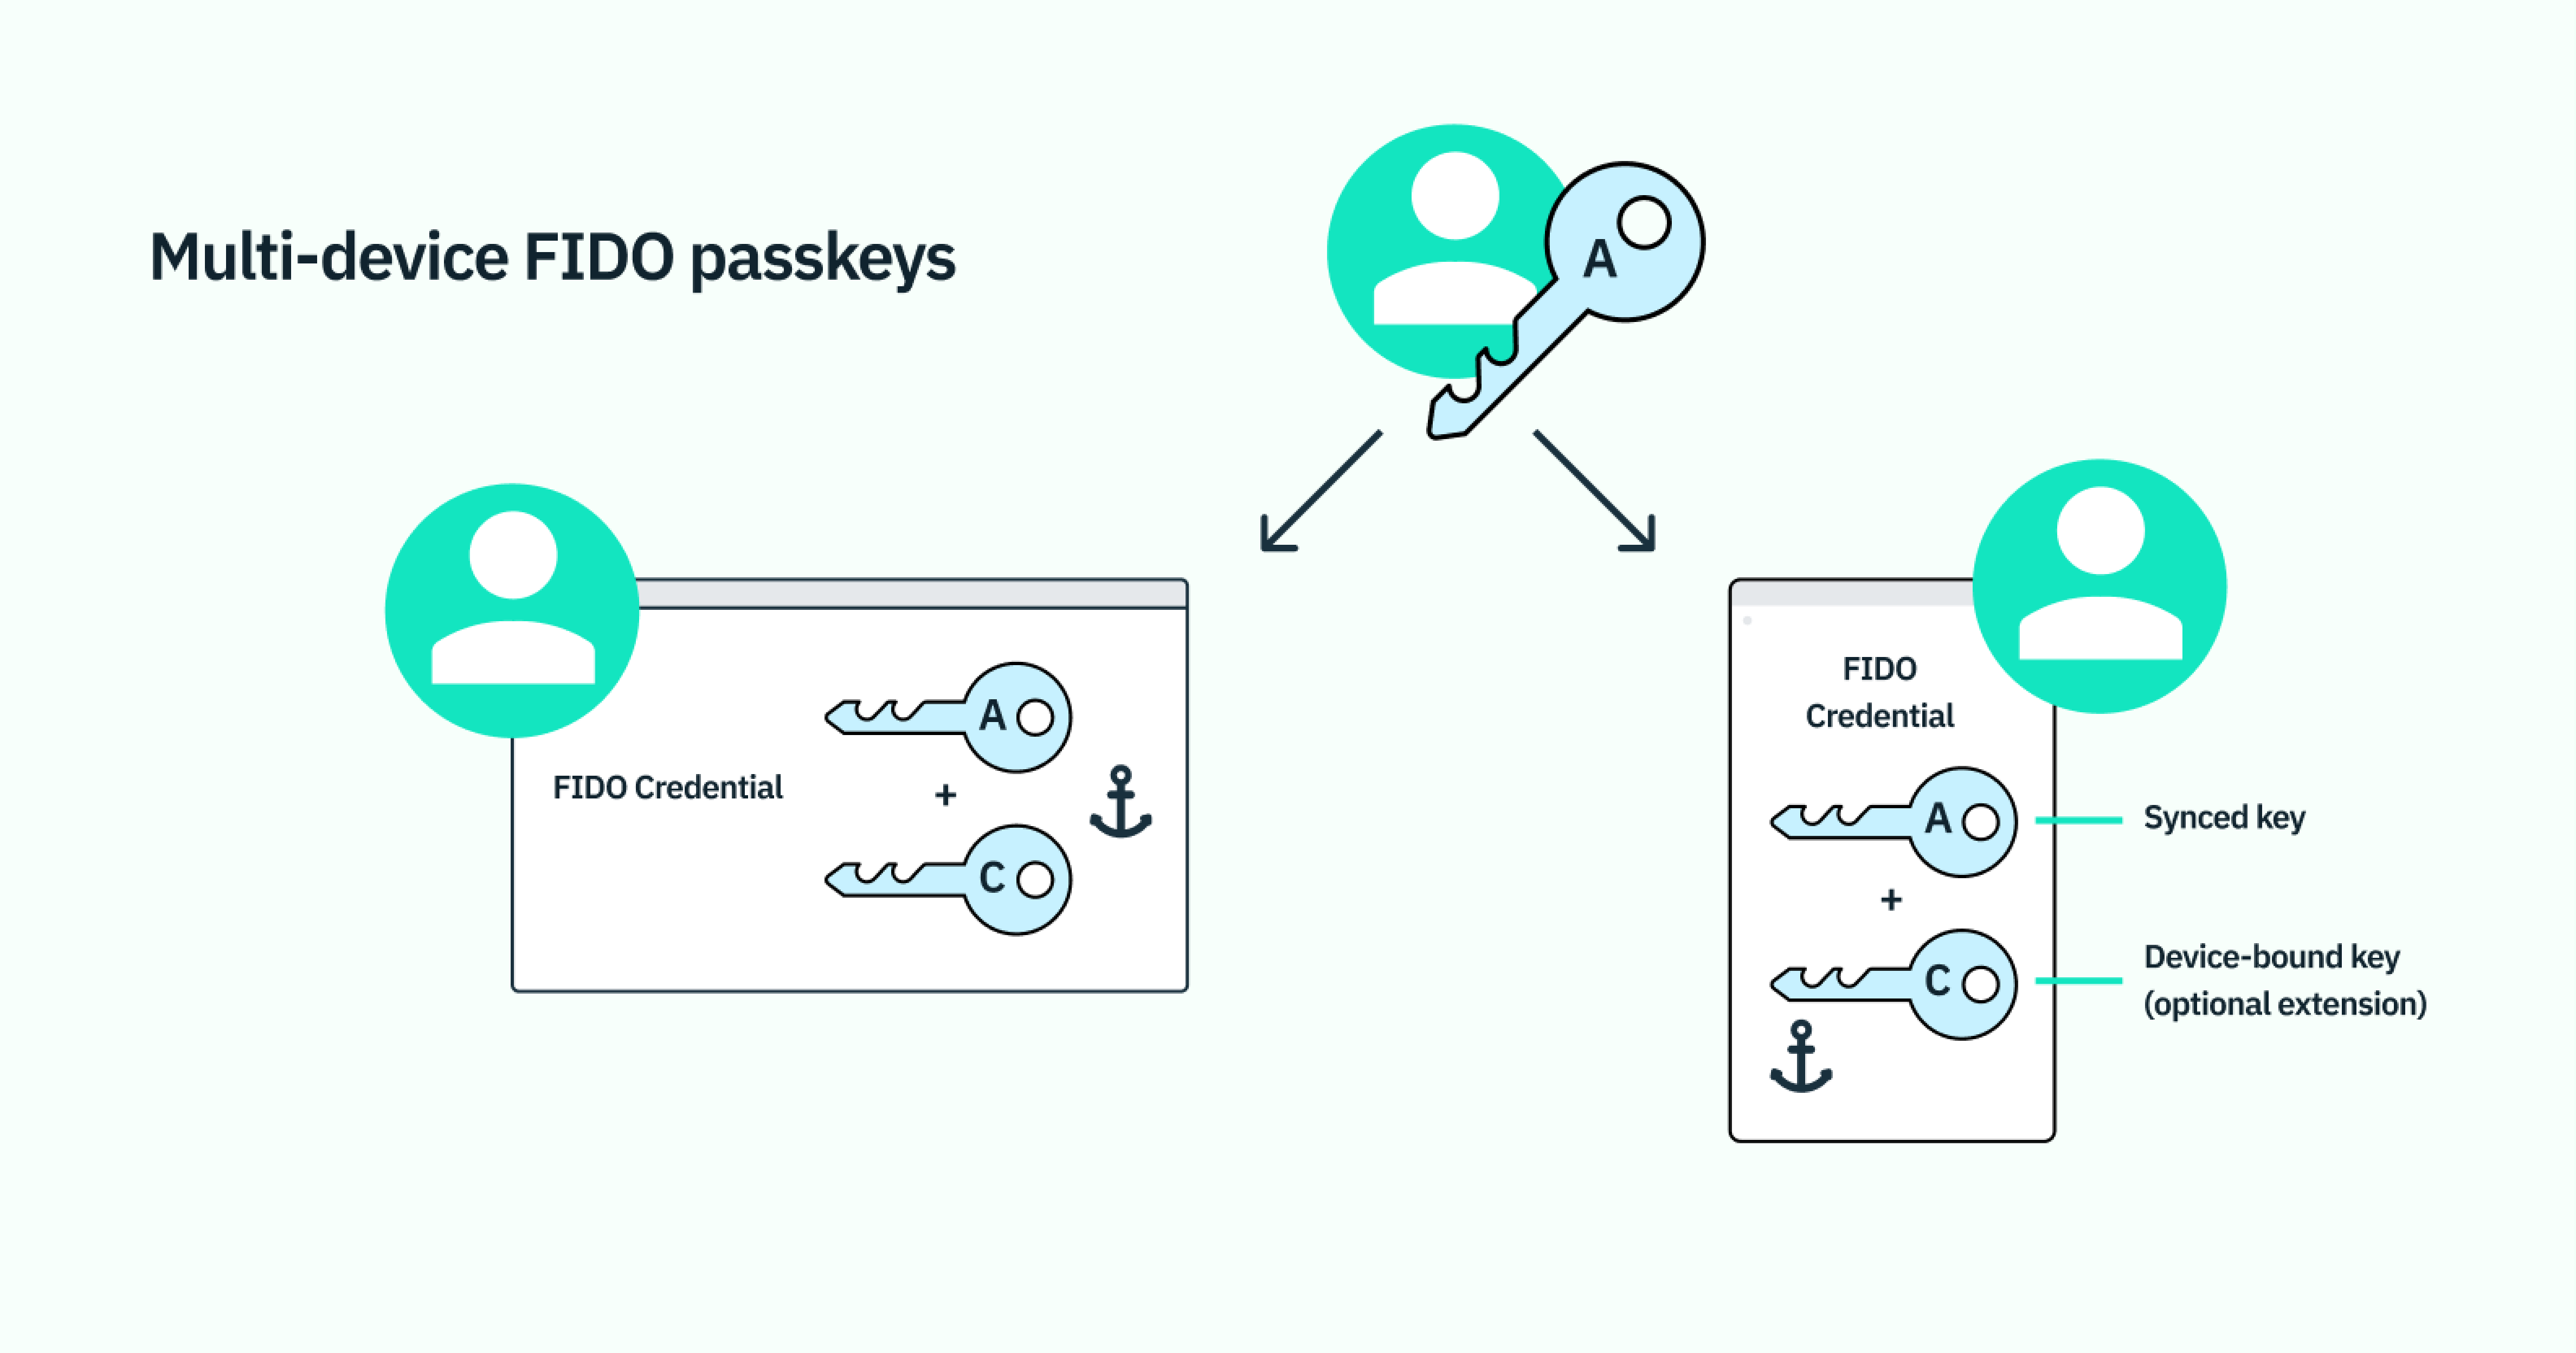 A diagram showing how multi-device FIDO passkeys leverage public key cryptography